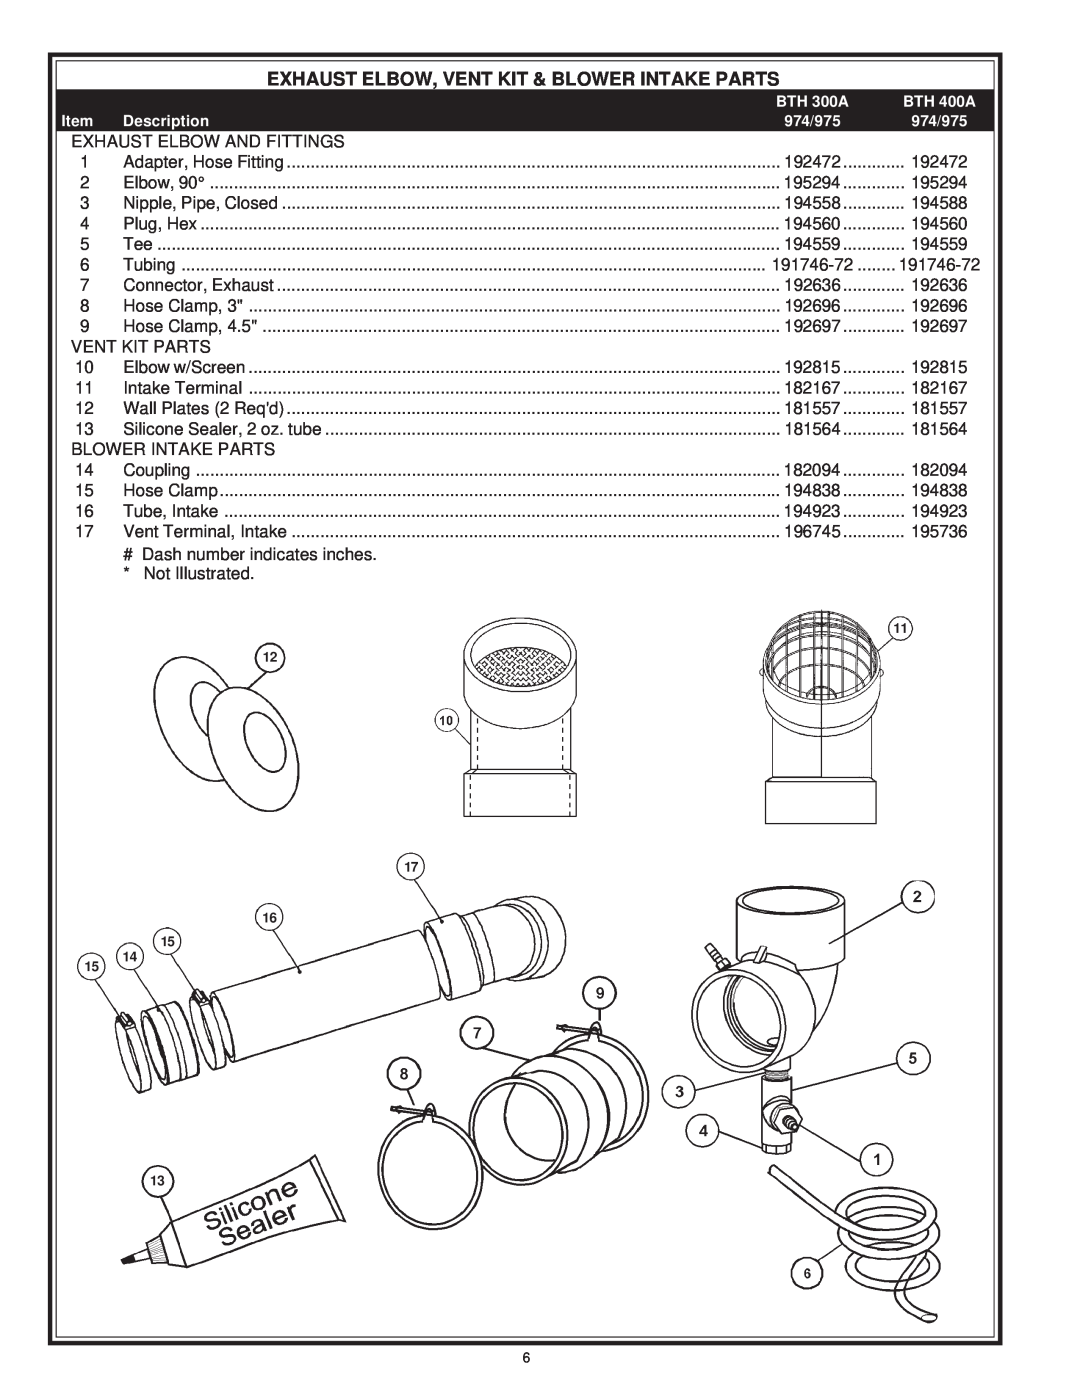 A.O. Smith 975 Series, 974 Series manual Exhaust Elbow, Vent Kit & Blower Intake Parts 